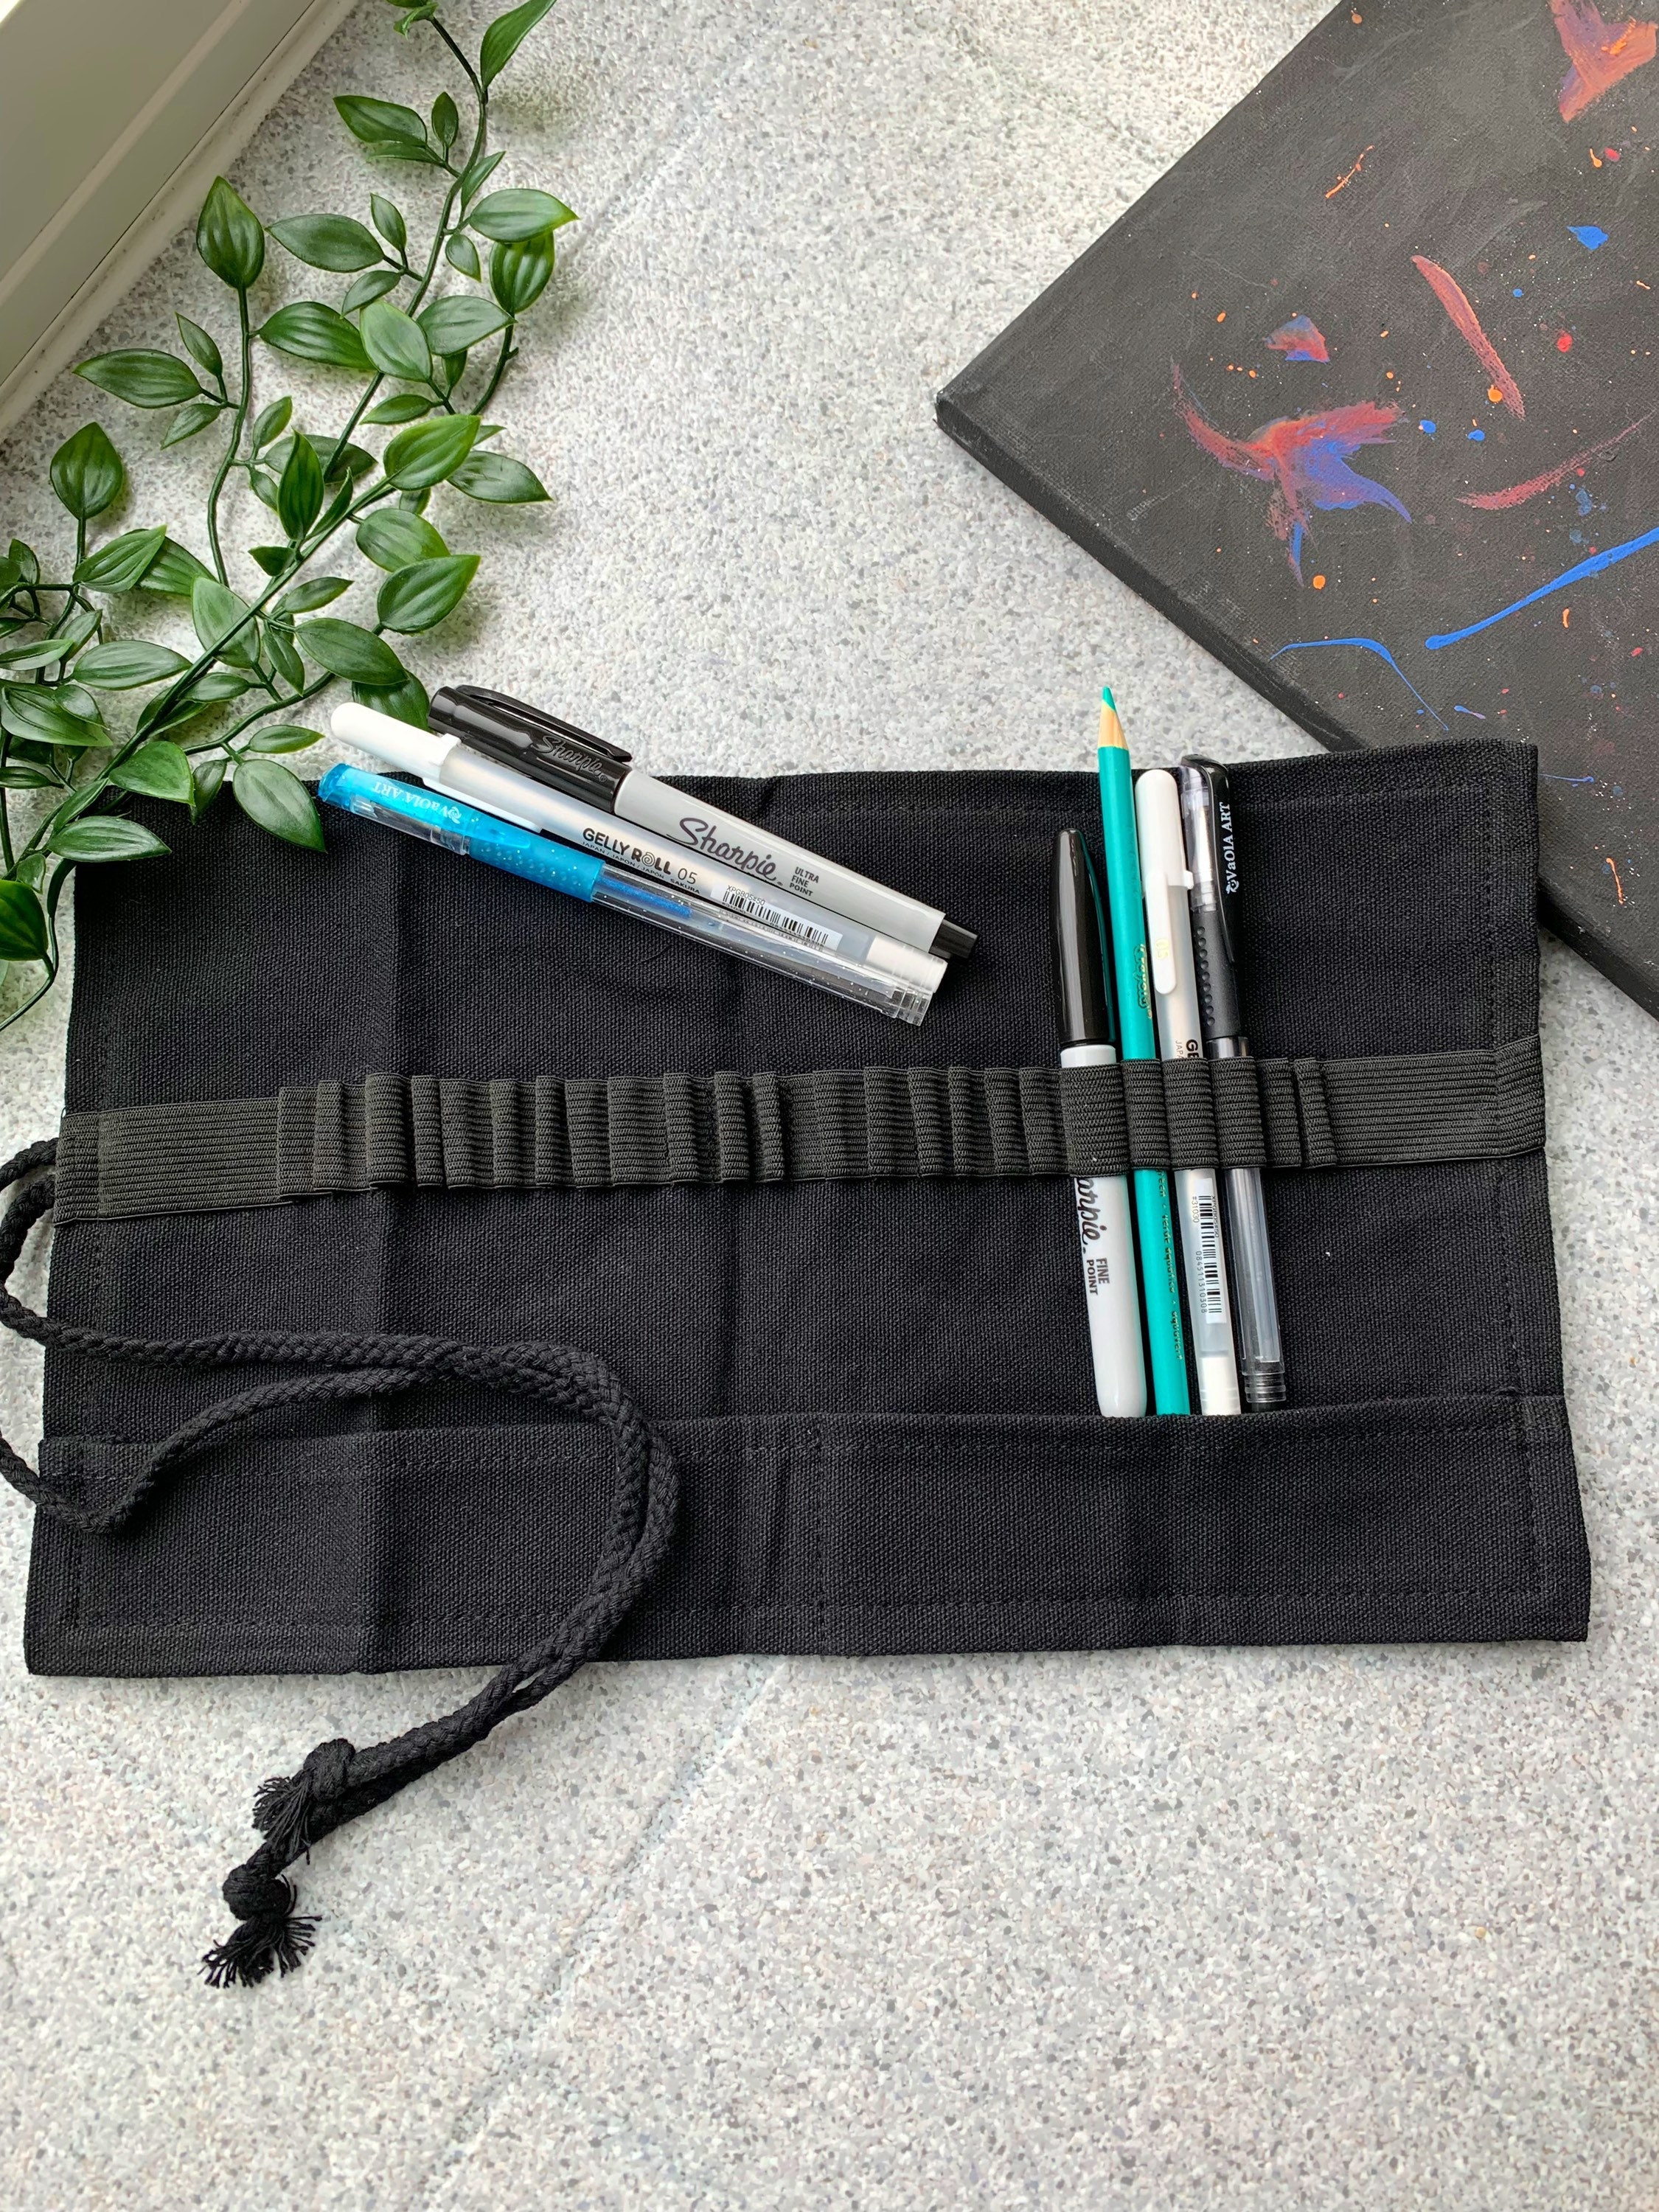 lasenersm 1 Piece 60 Slot Canvas Pencil Roll Up Case Pencil Wrap Case Roll Up Pouch Pen Wrap Organizer Roll Up Pencil Holder Charcoal Pencils Rolling